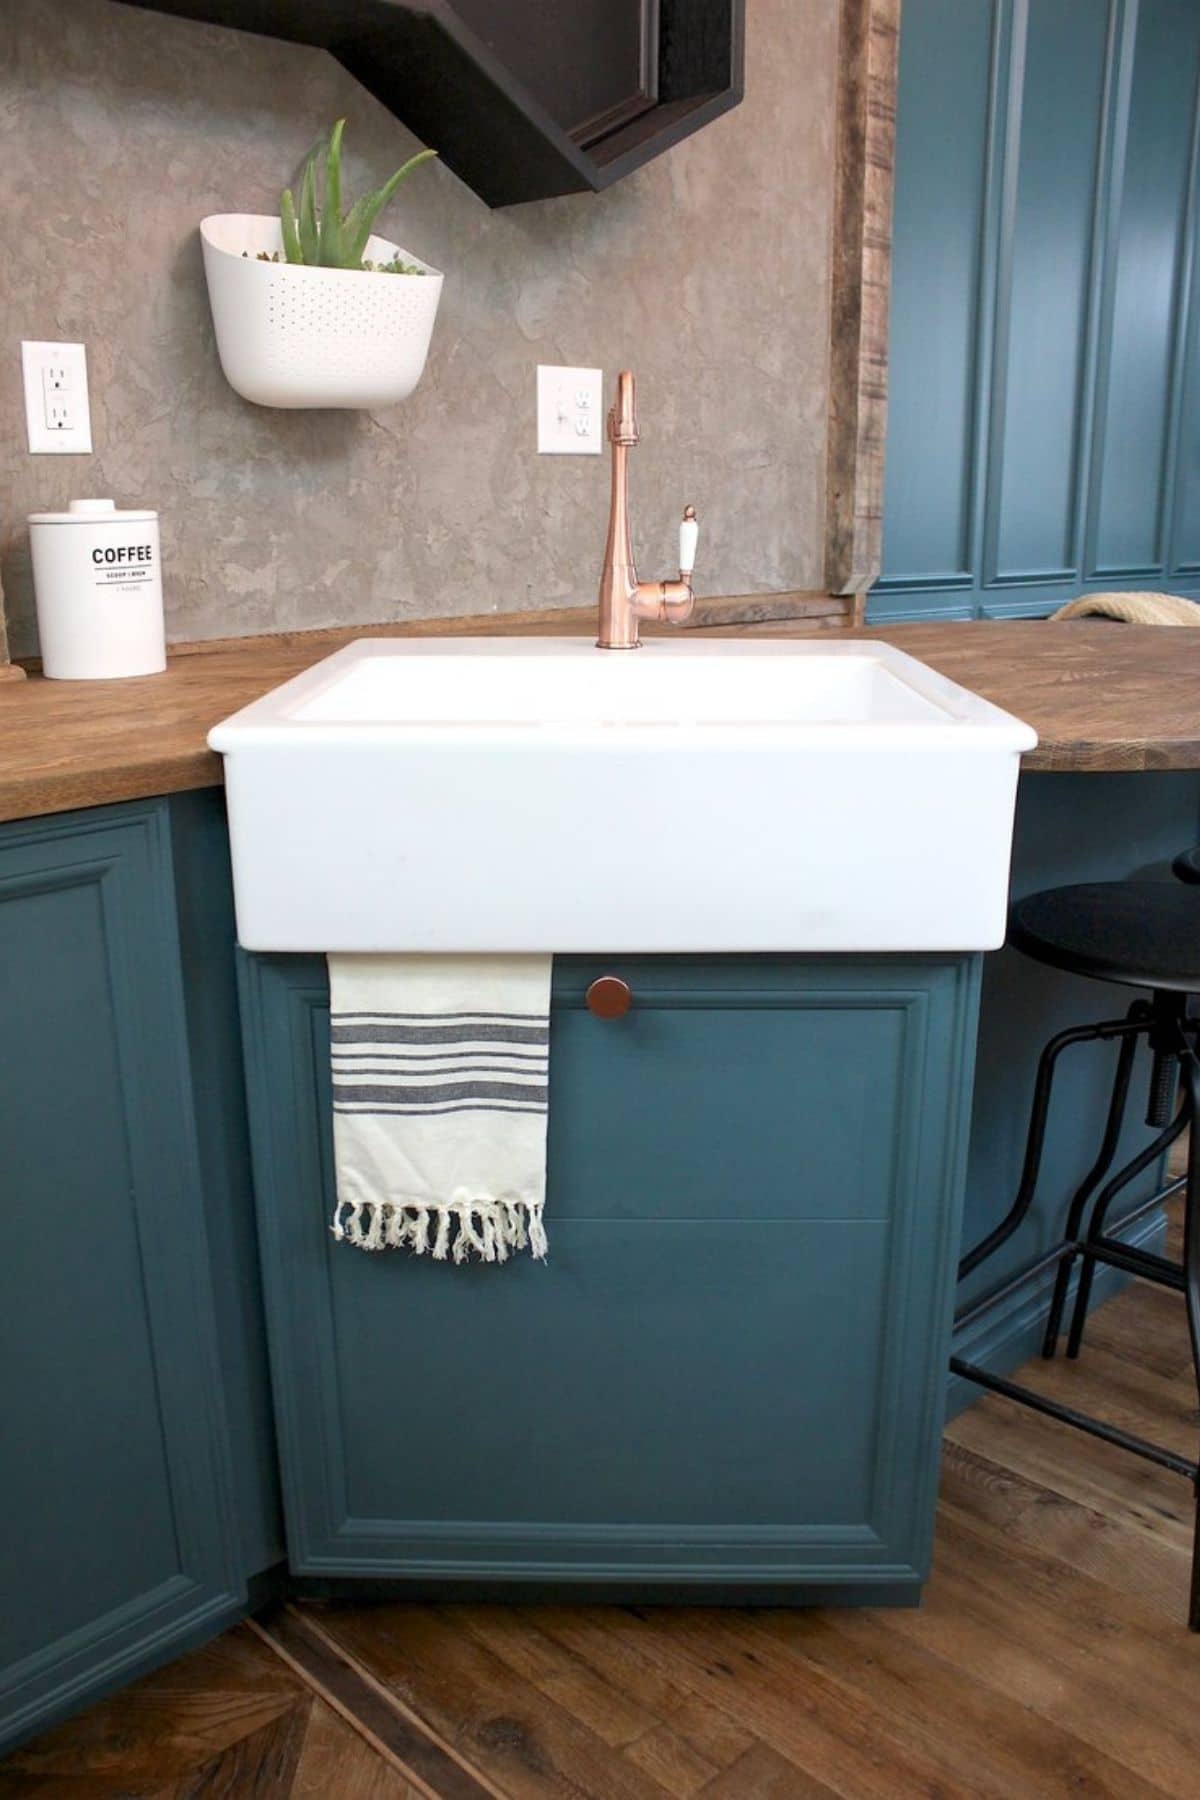 Teal cabinets under white farmhouse sink